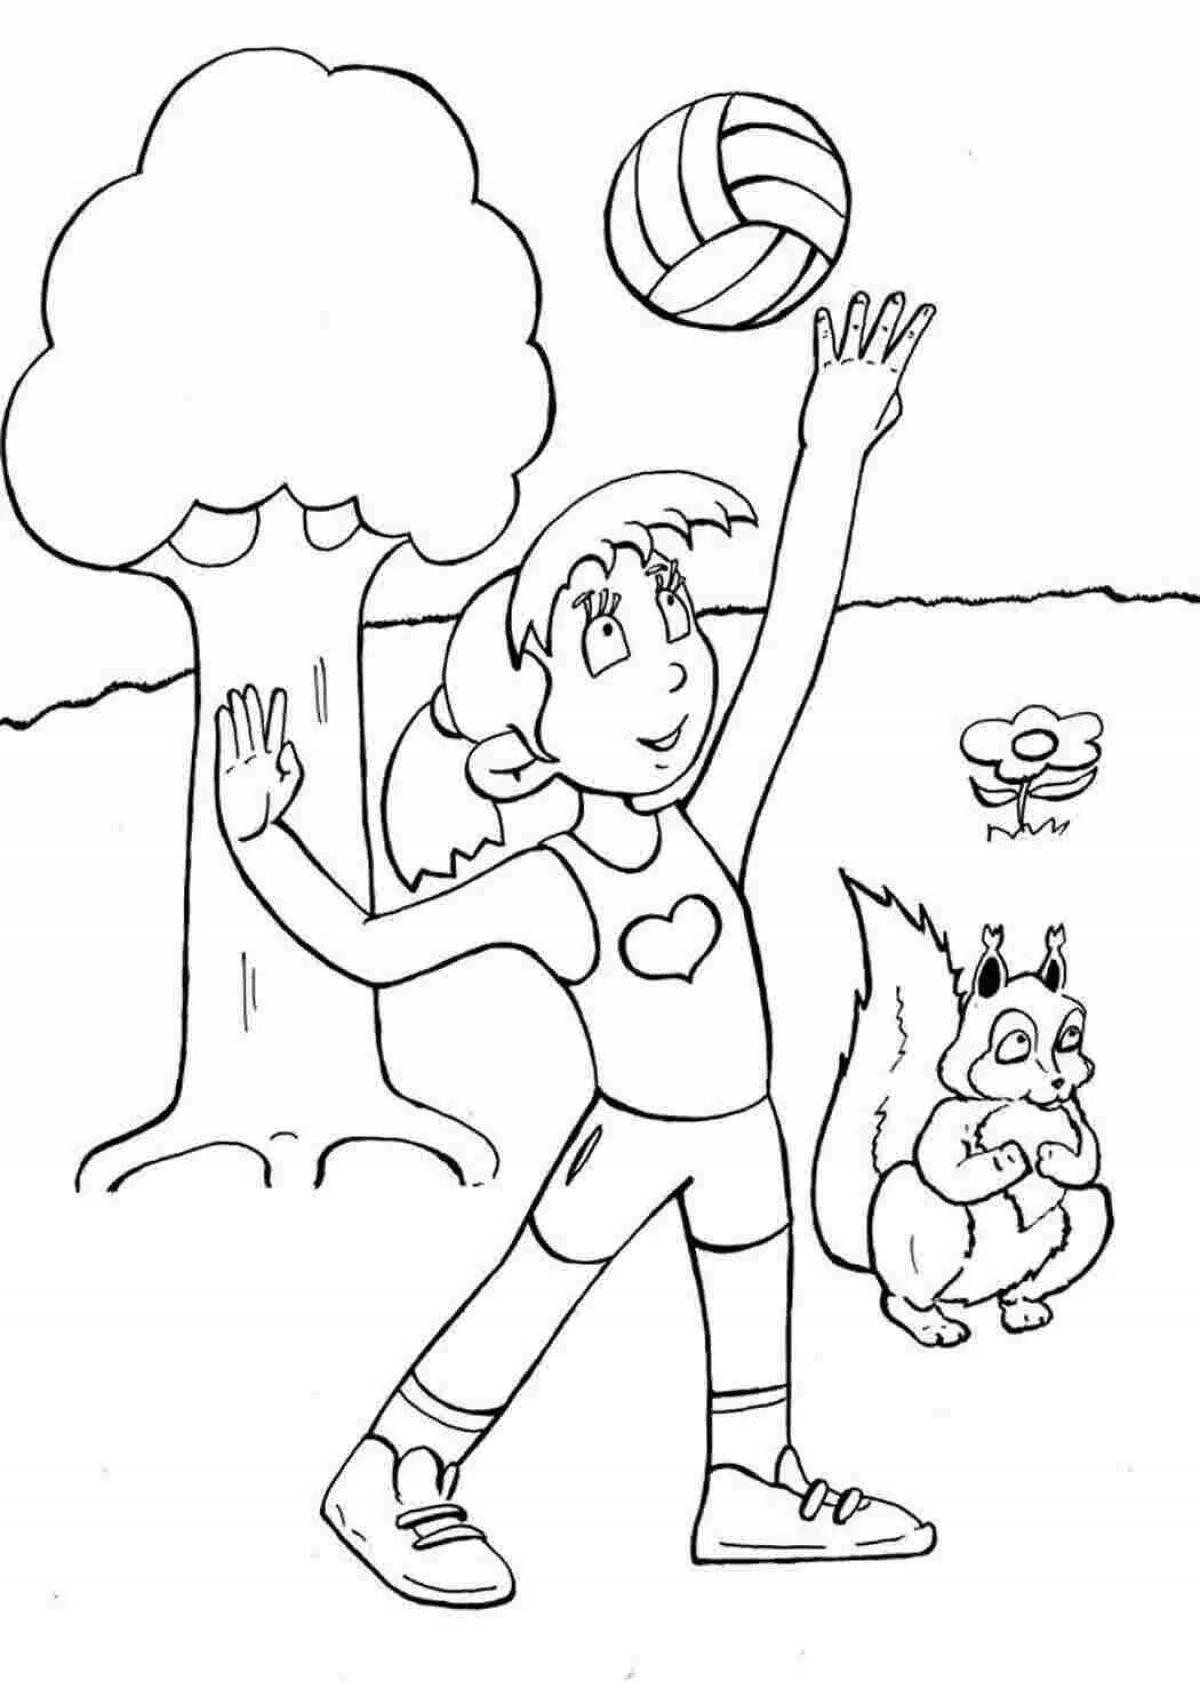 Fun coloring book about healthy lifestyle for kids